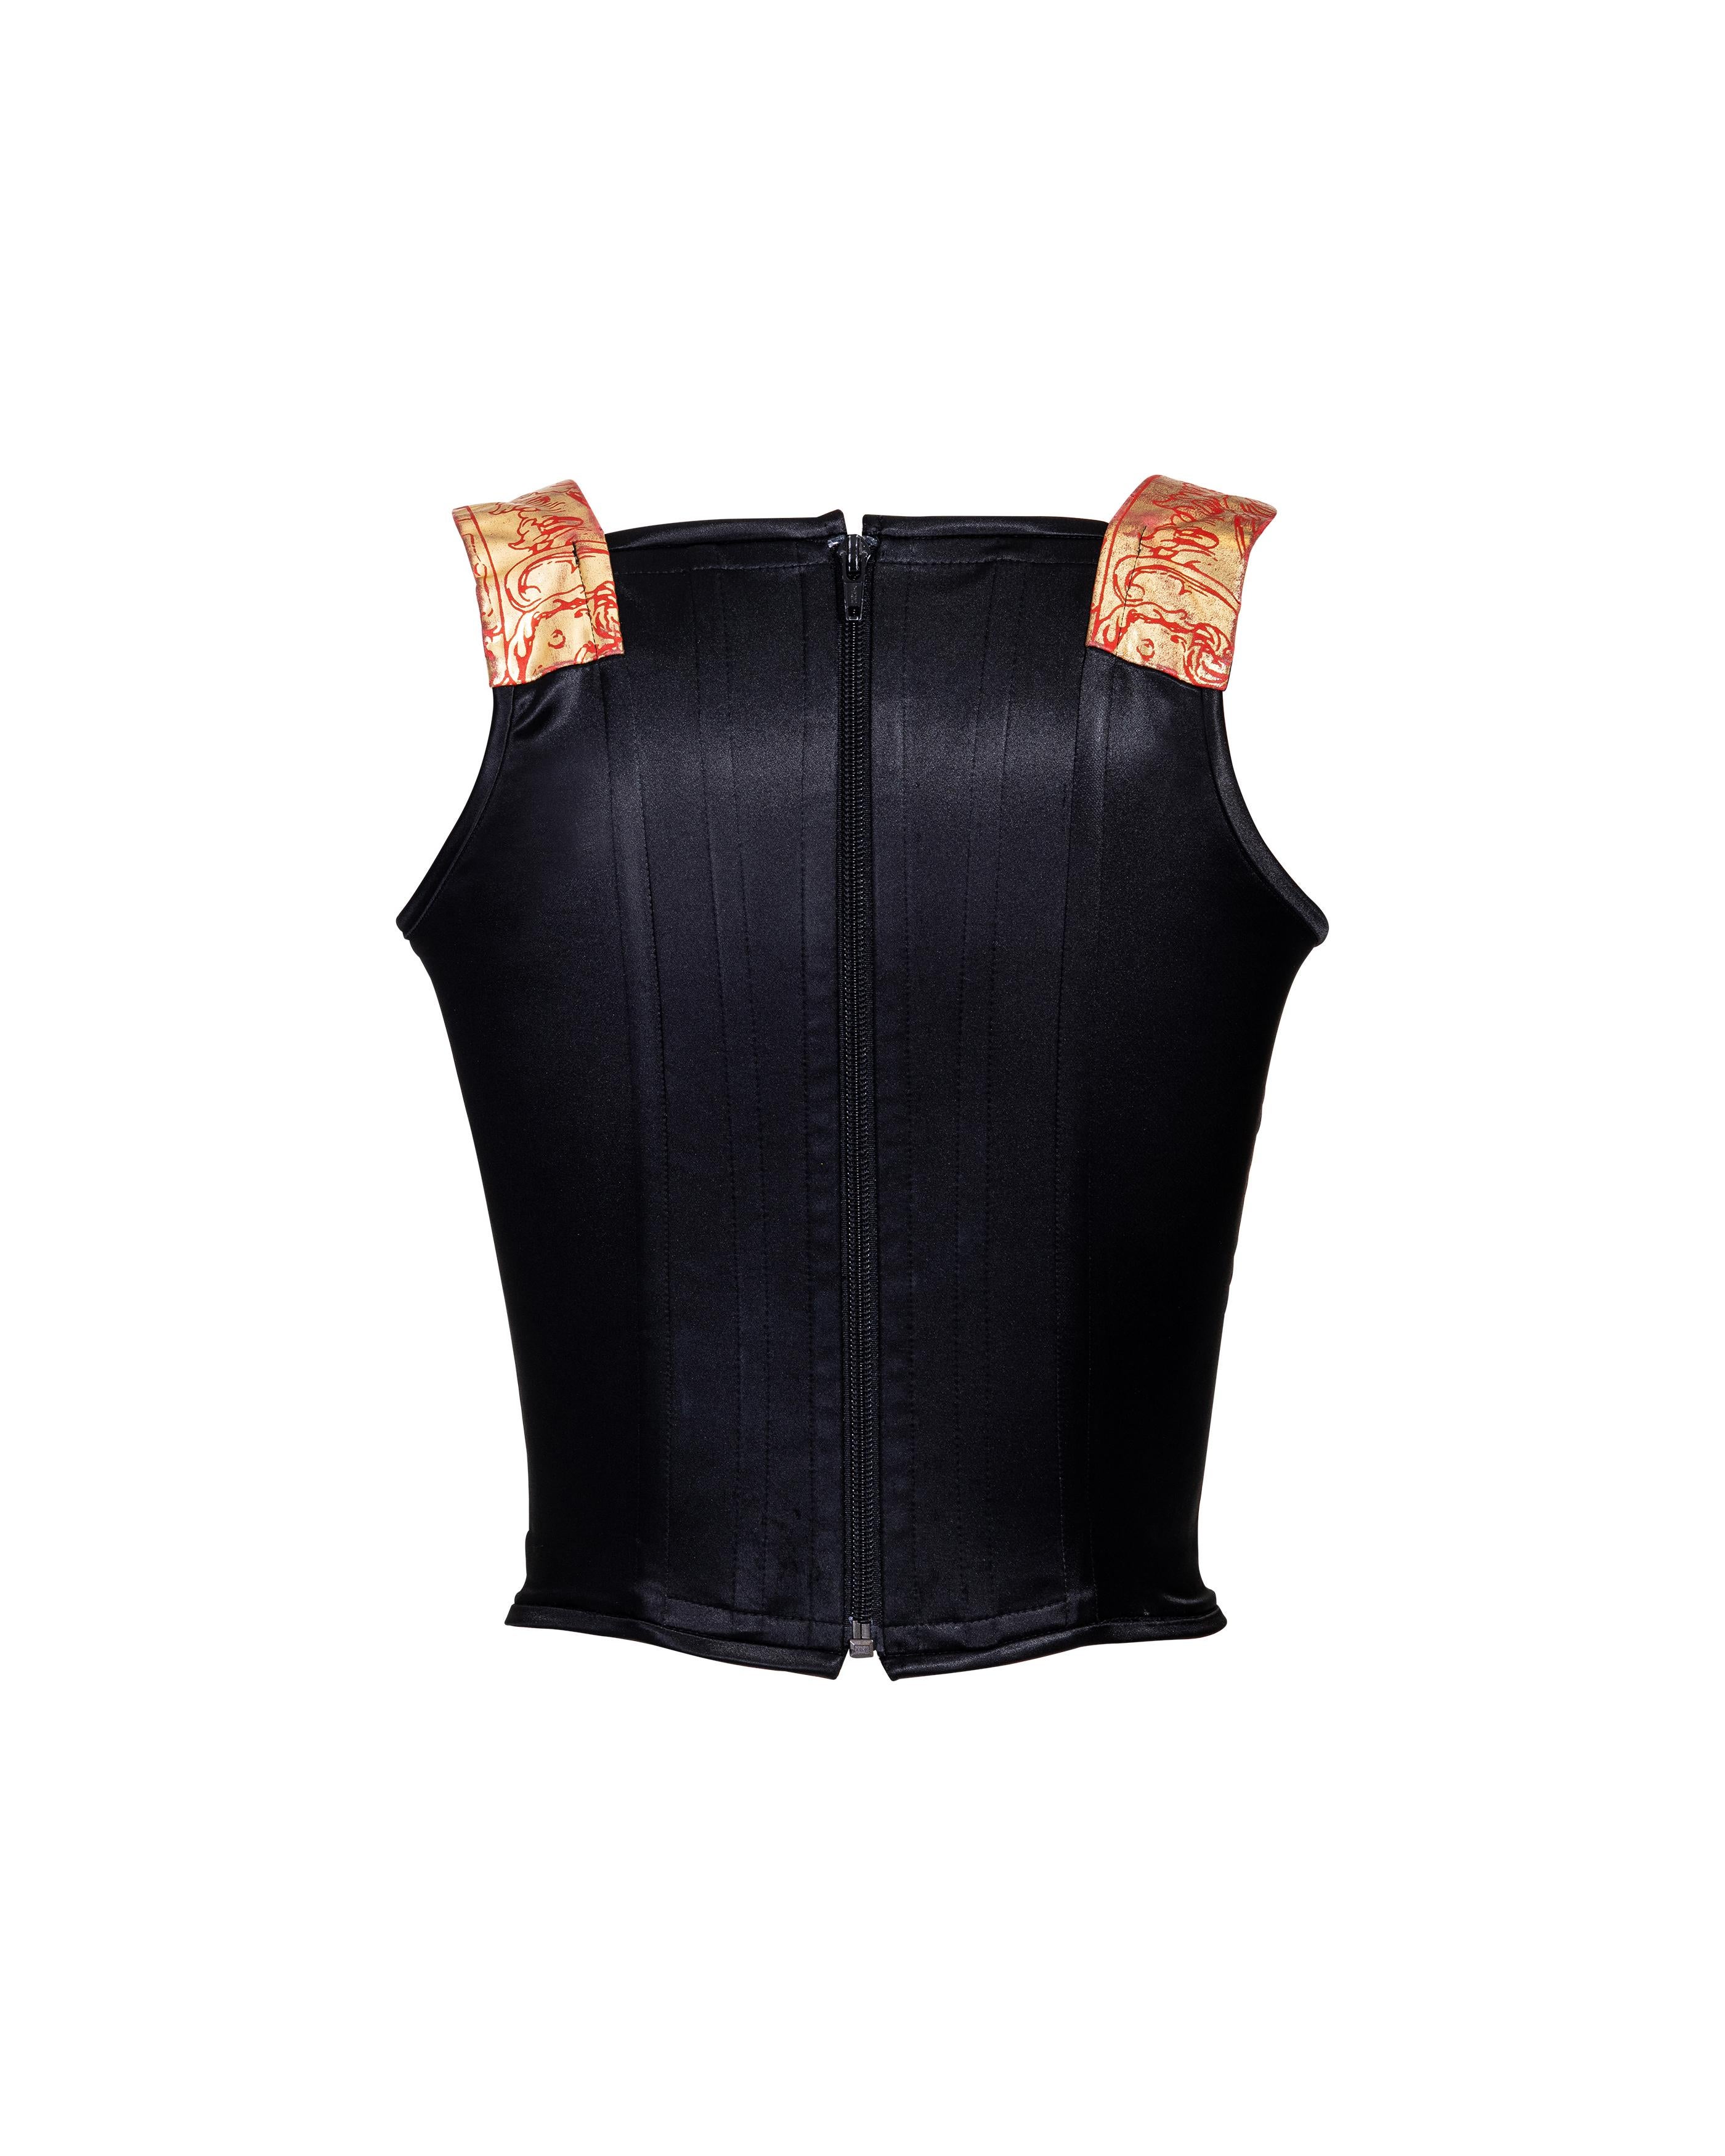 A/W 1991 Vivienne Westwood Black Paneling Corset with Boucher Print In Excellent Condition In North Hollywood, CA